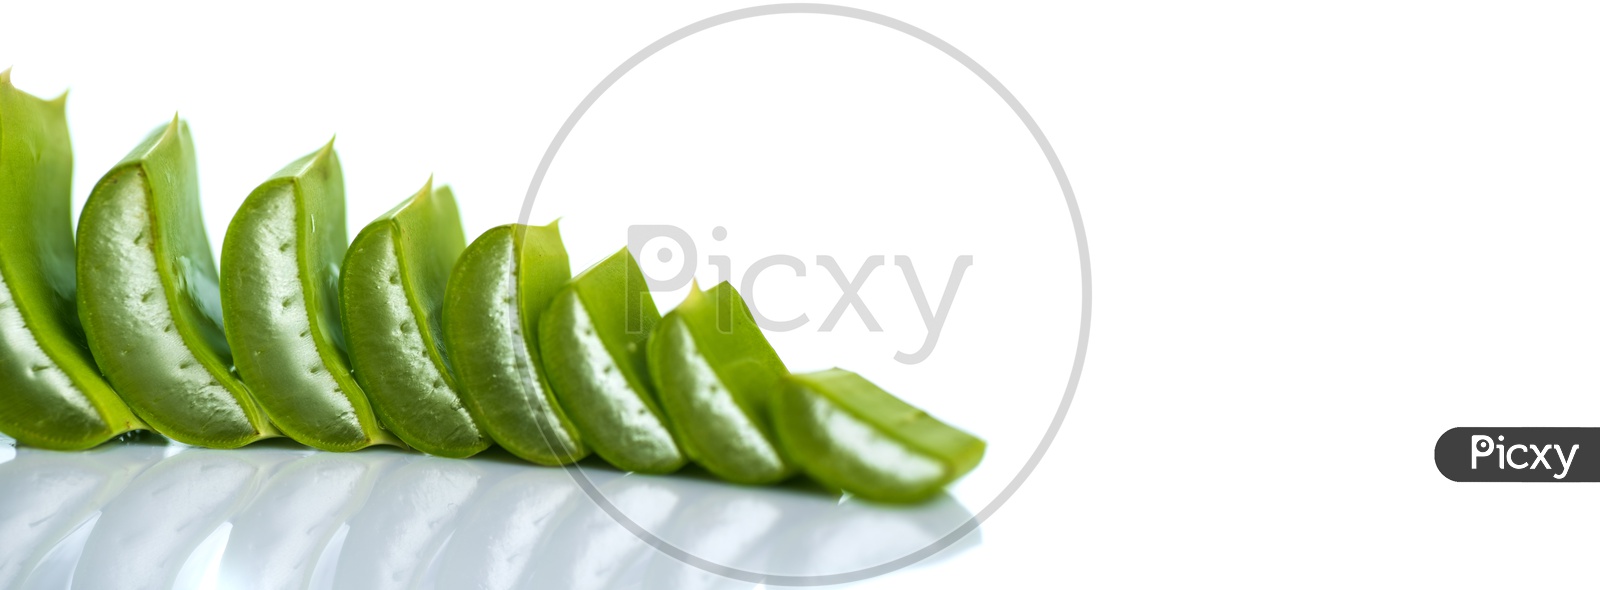 Sliced Aloe Vera Pieces on an Isolated White Background